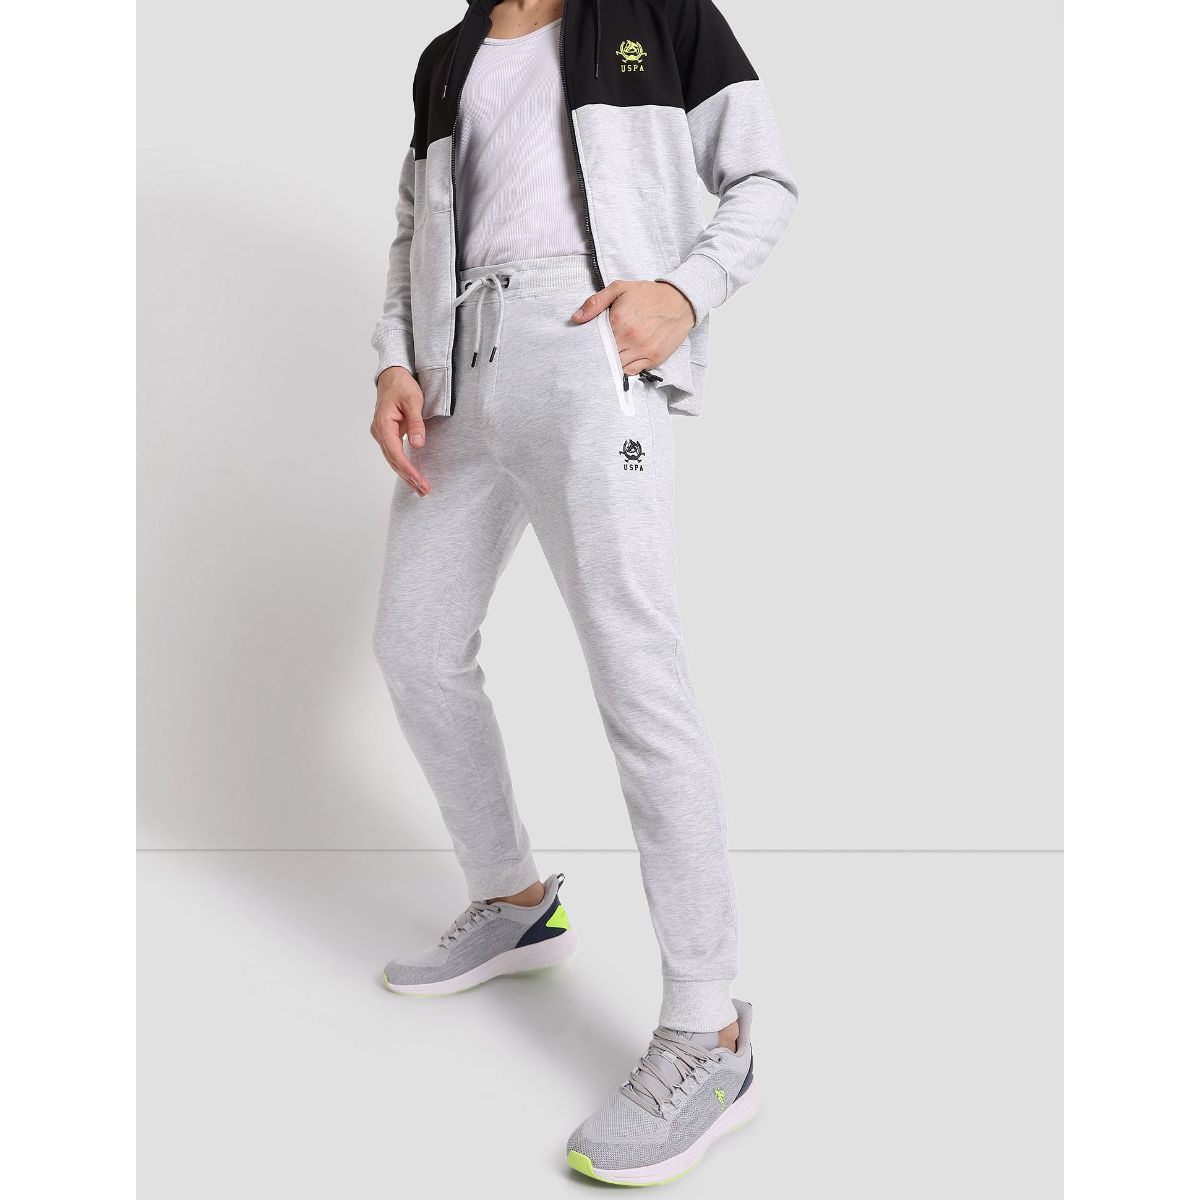 Buy U.S. POLO ASSN. Durable Athletic Joggers online